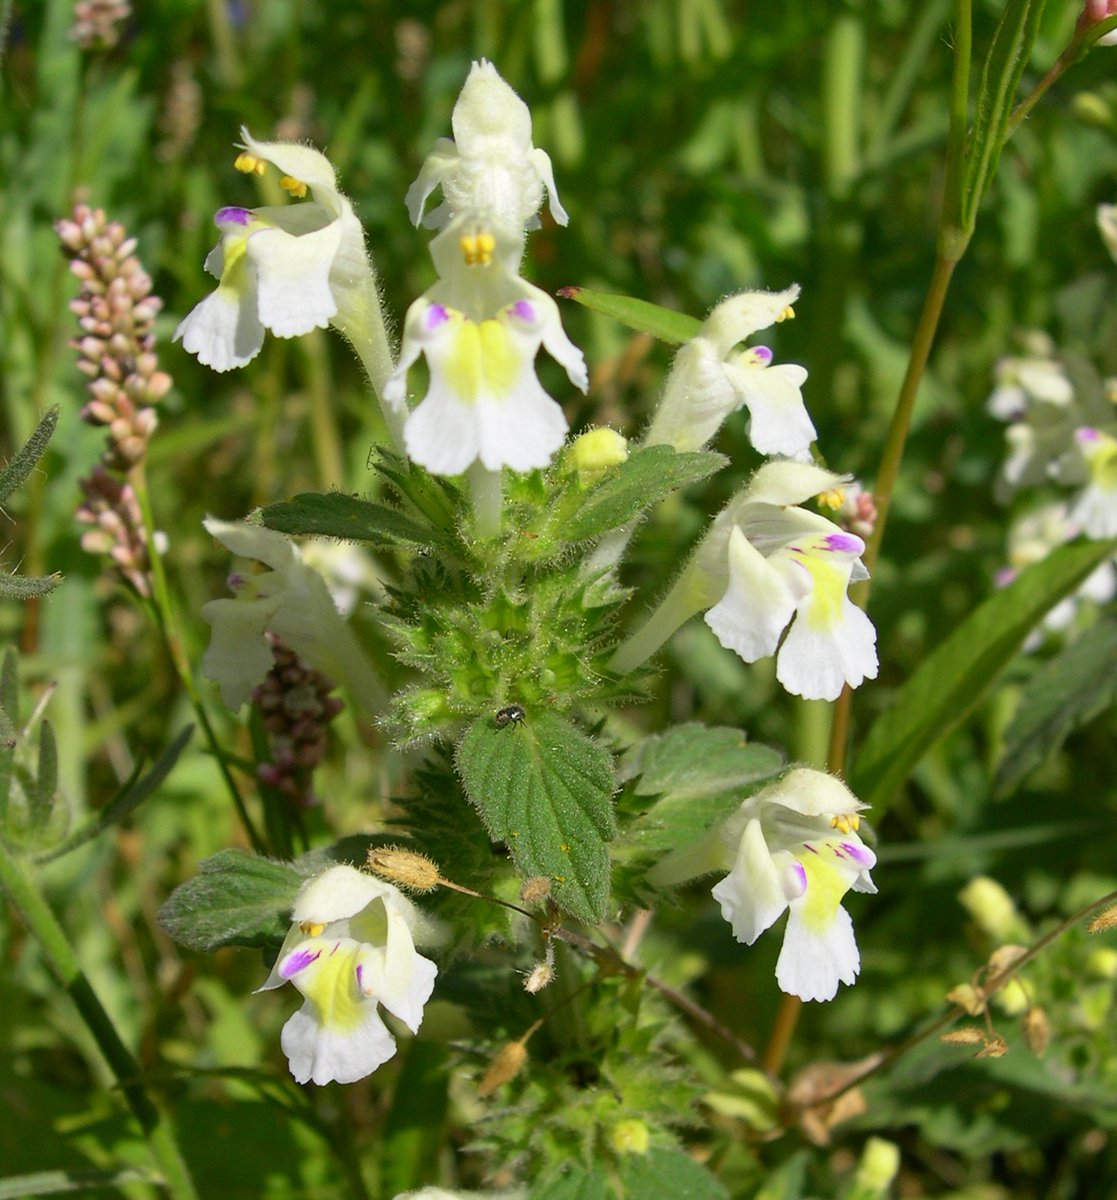 THREAD on #Extinction > The last wild flower to go extinct in Britain was Downy Hemp-nettle, a beautiful large-flowered cornfield flower that grew on a farm outside #Bangor in North Wales 
#StateOfNature #ExtinctionTheFacts #GBO5  @phoeb0 @pgreenfielduk @Vic_Gill @DrTrevorDines